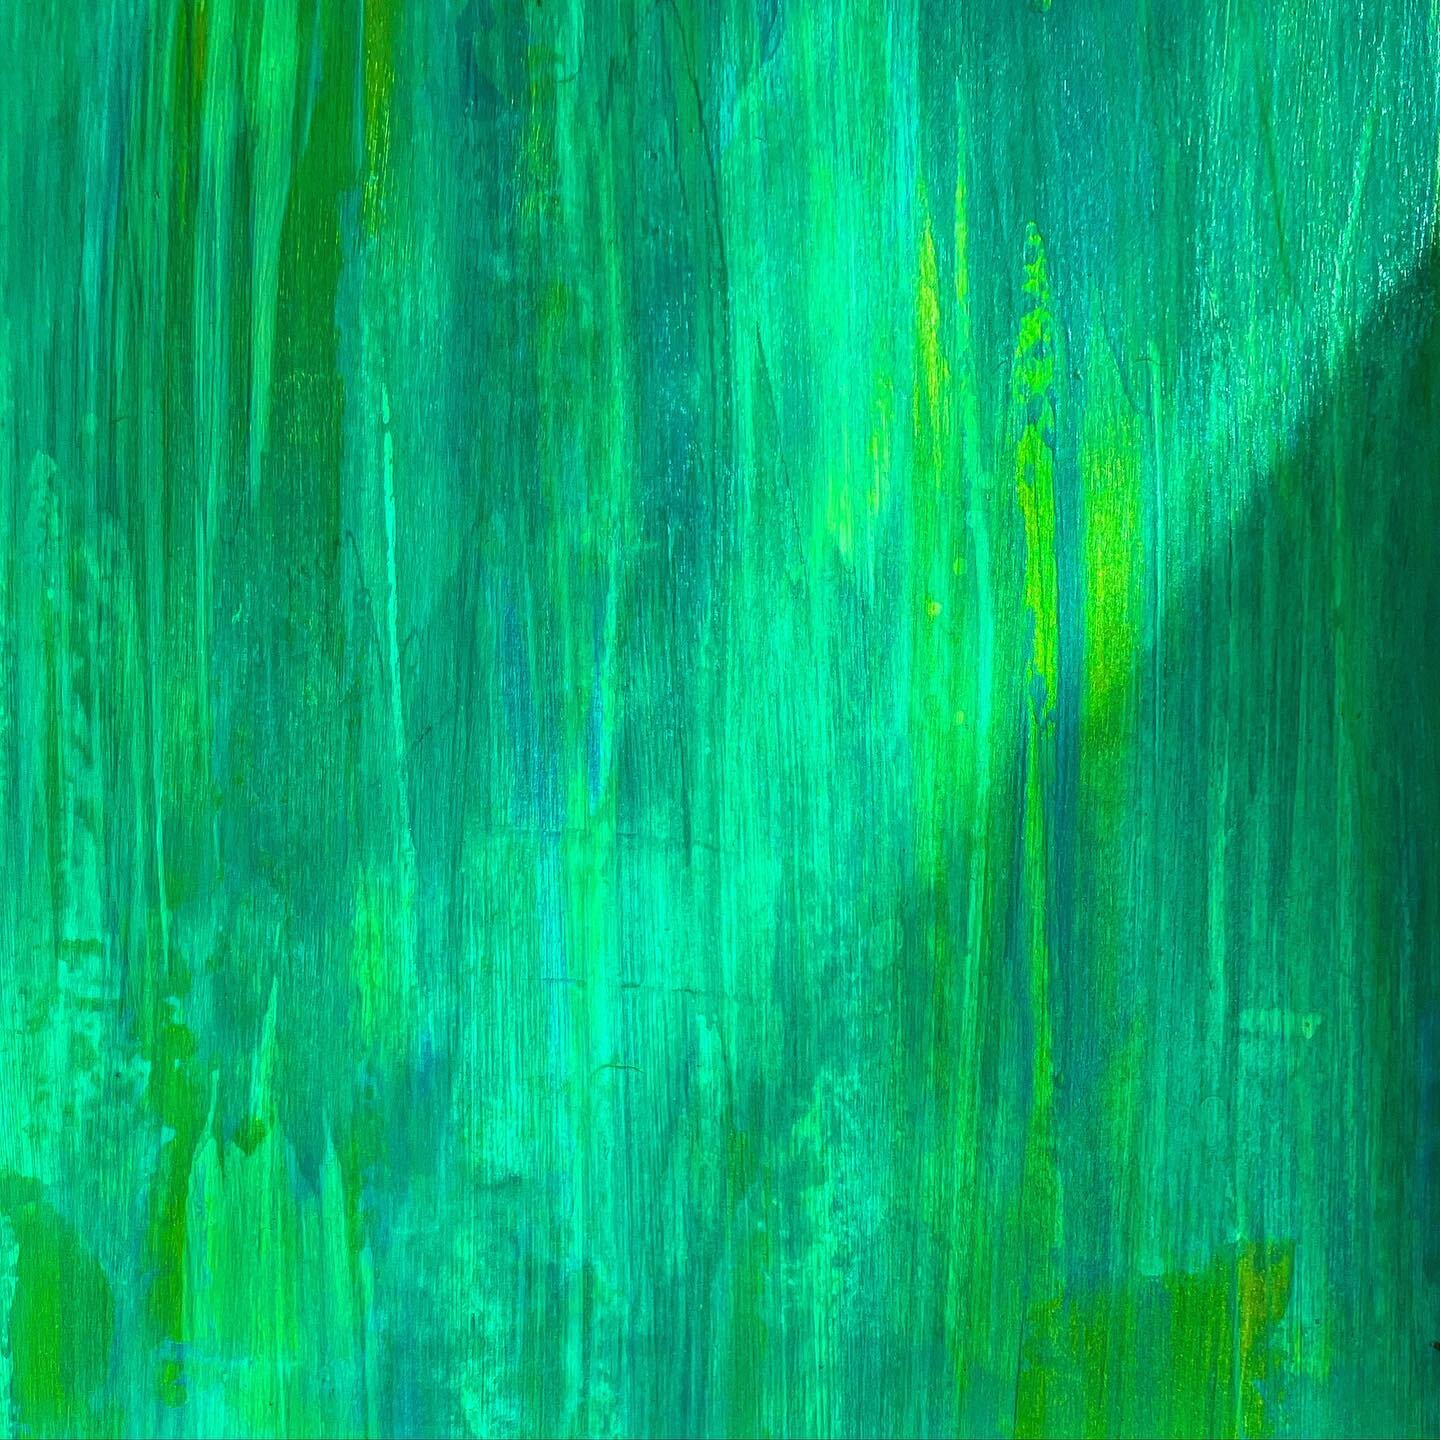 What to paint in this background? 🌿🧩💚 #abstractpainting #layersonlayers #bundabergartist #acyrlicpainting